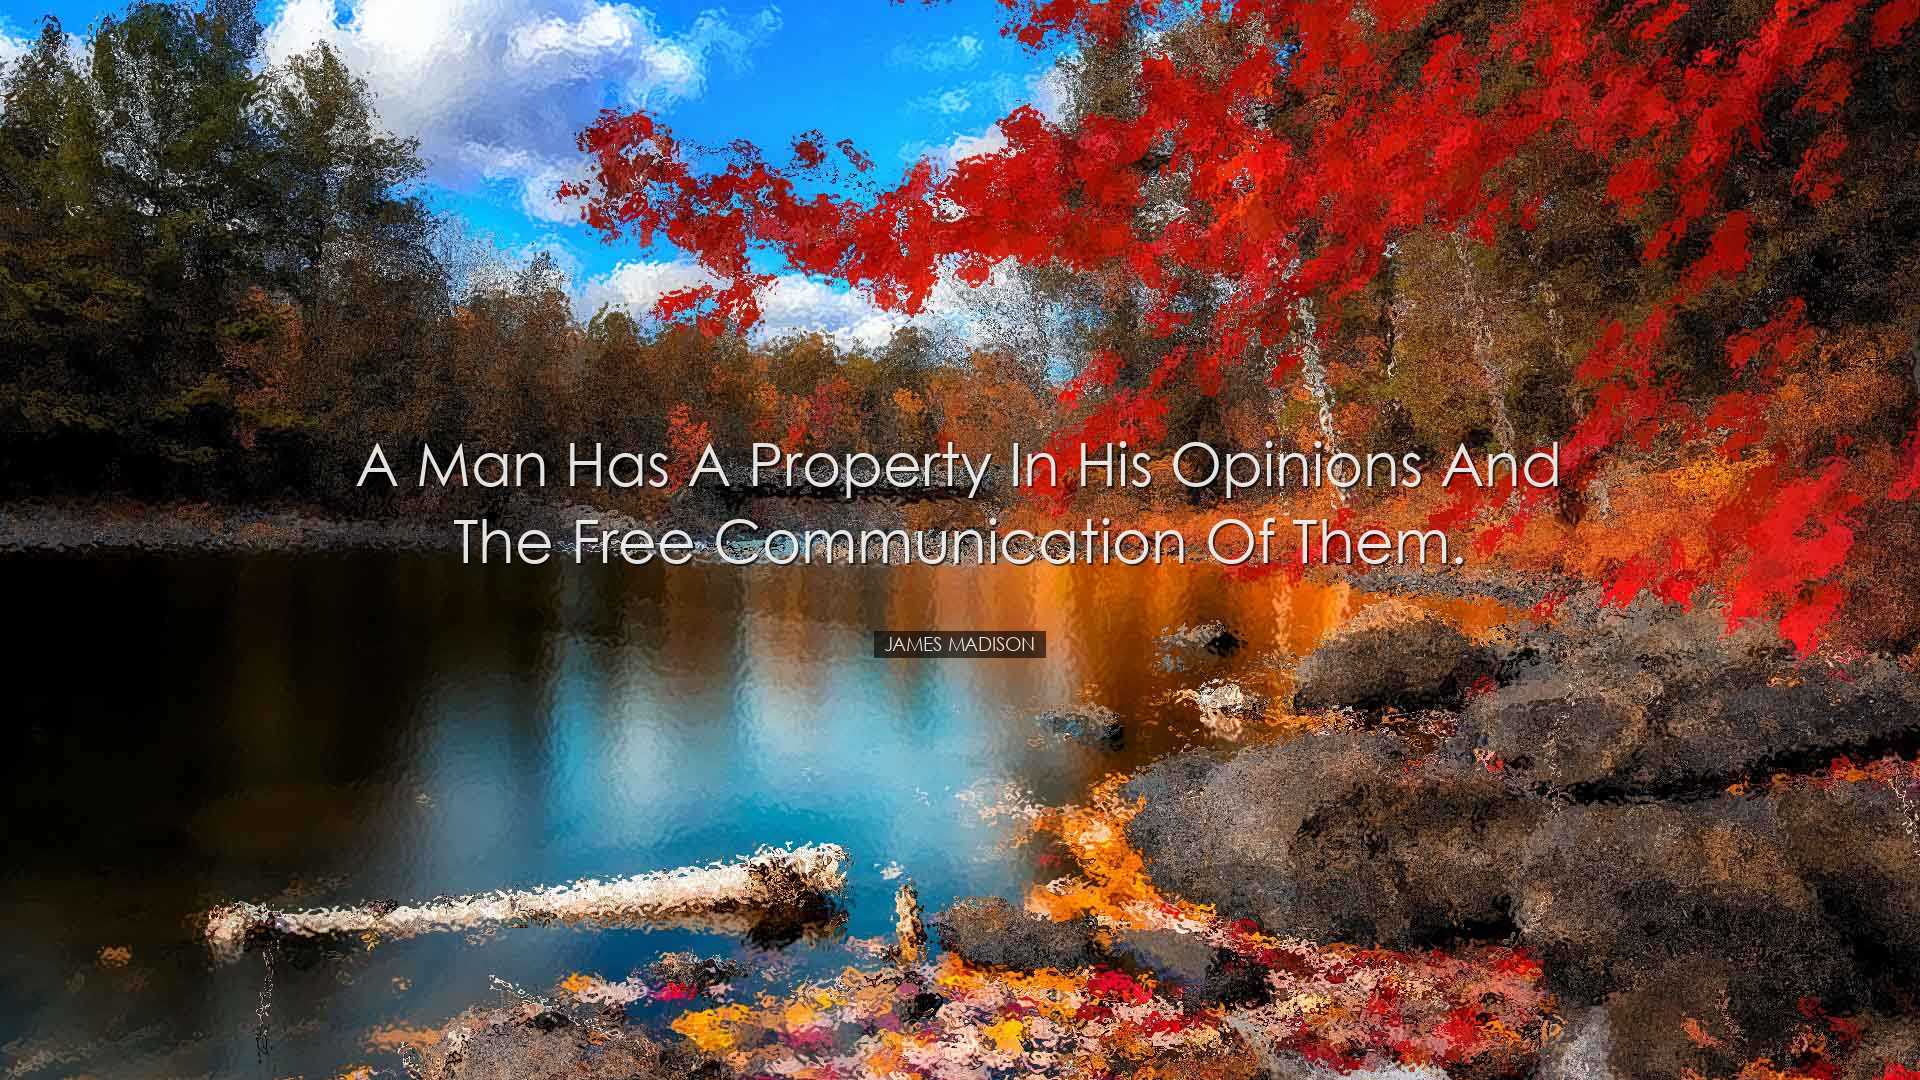 A man has a property in his opinions and the free communication of